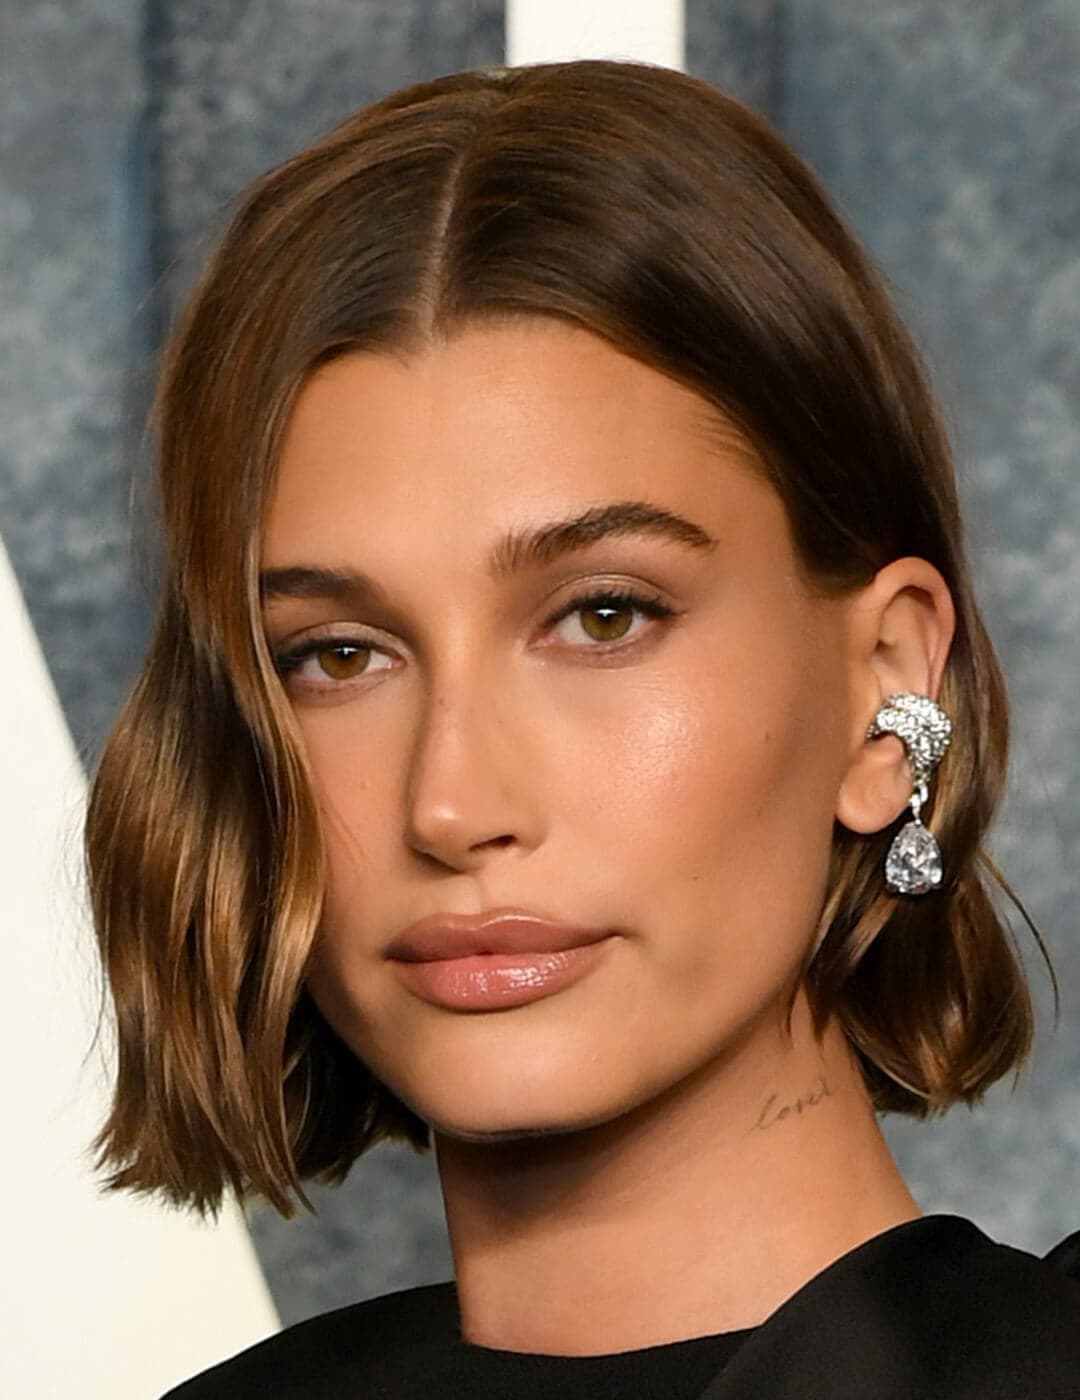 Close-up look of Hailey Bieber rocking a subtle makeup style, paired with her chic blunt mini bob hairstyle with Crystal Clip Earrings in a stylish tear-drop design